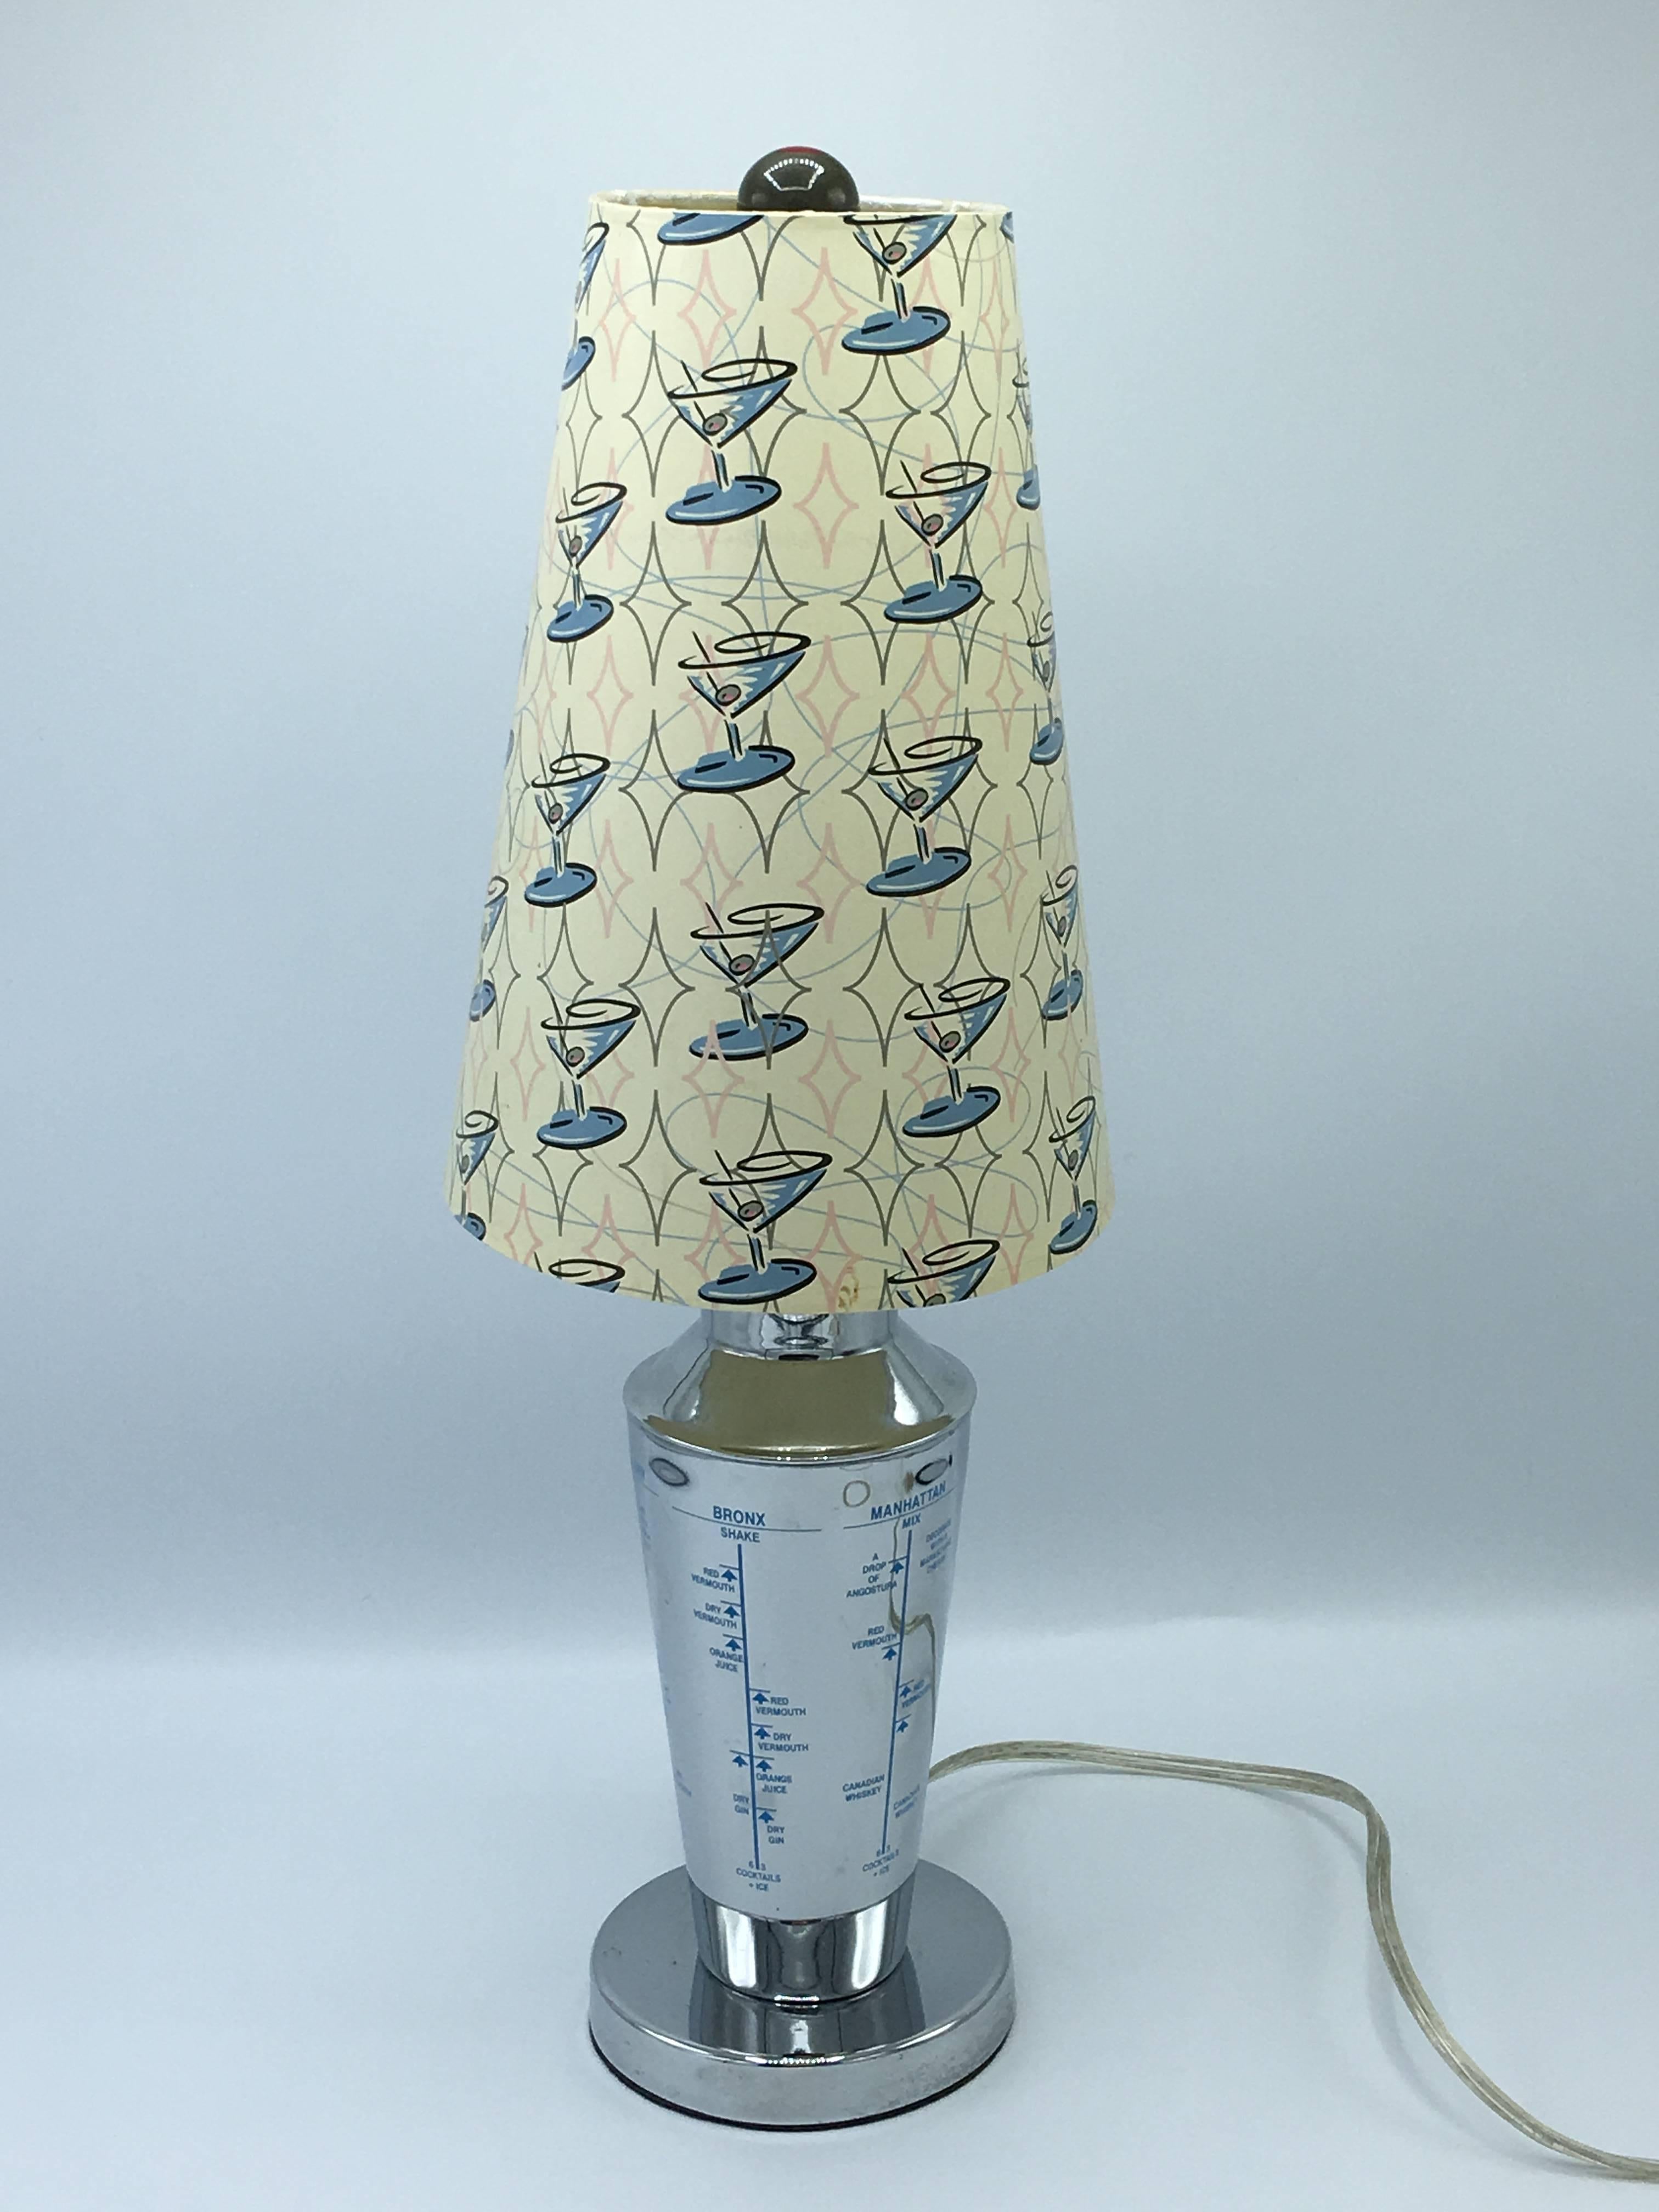 Offered is a gorgeous and quirky, 1960s chrome martini Shaker lamp with coordinating shade and finial. The shade has a retro martini print on it, with a matching olive finial. Rewired.